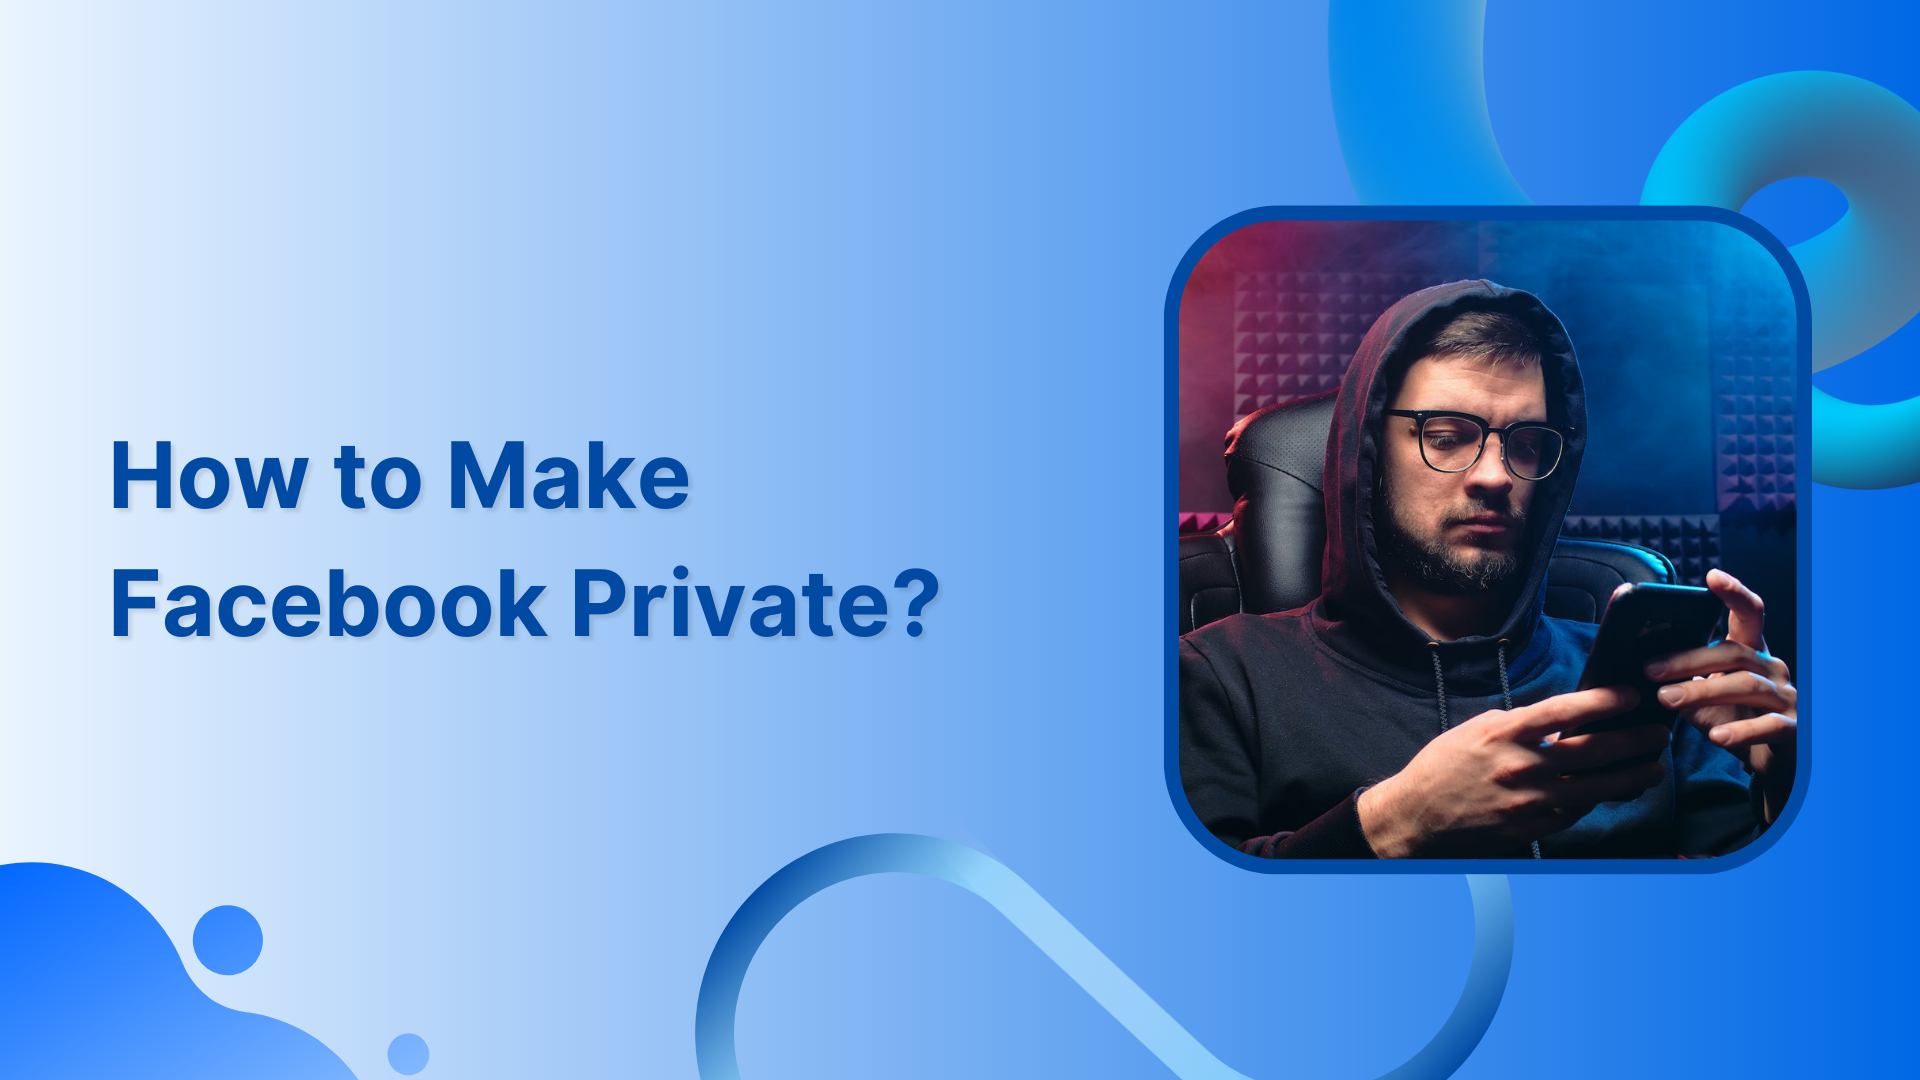 How to make Facebook Private